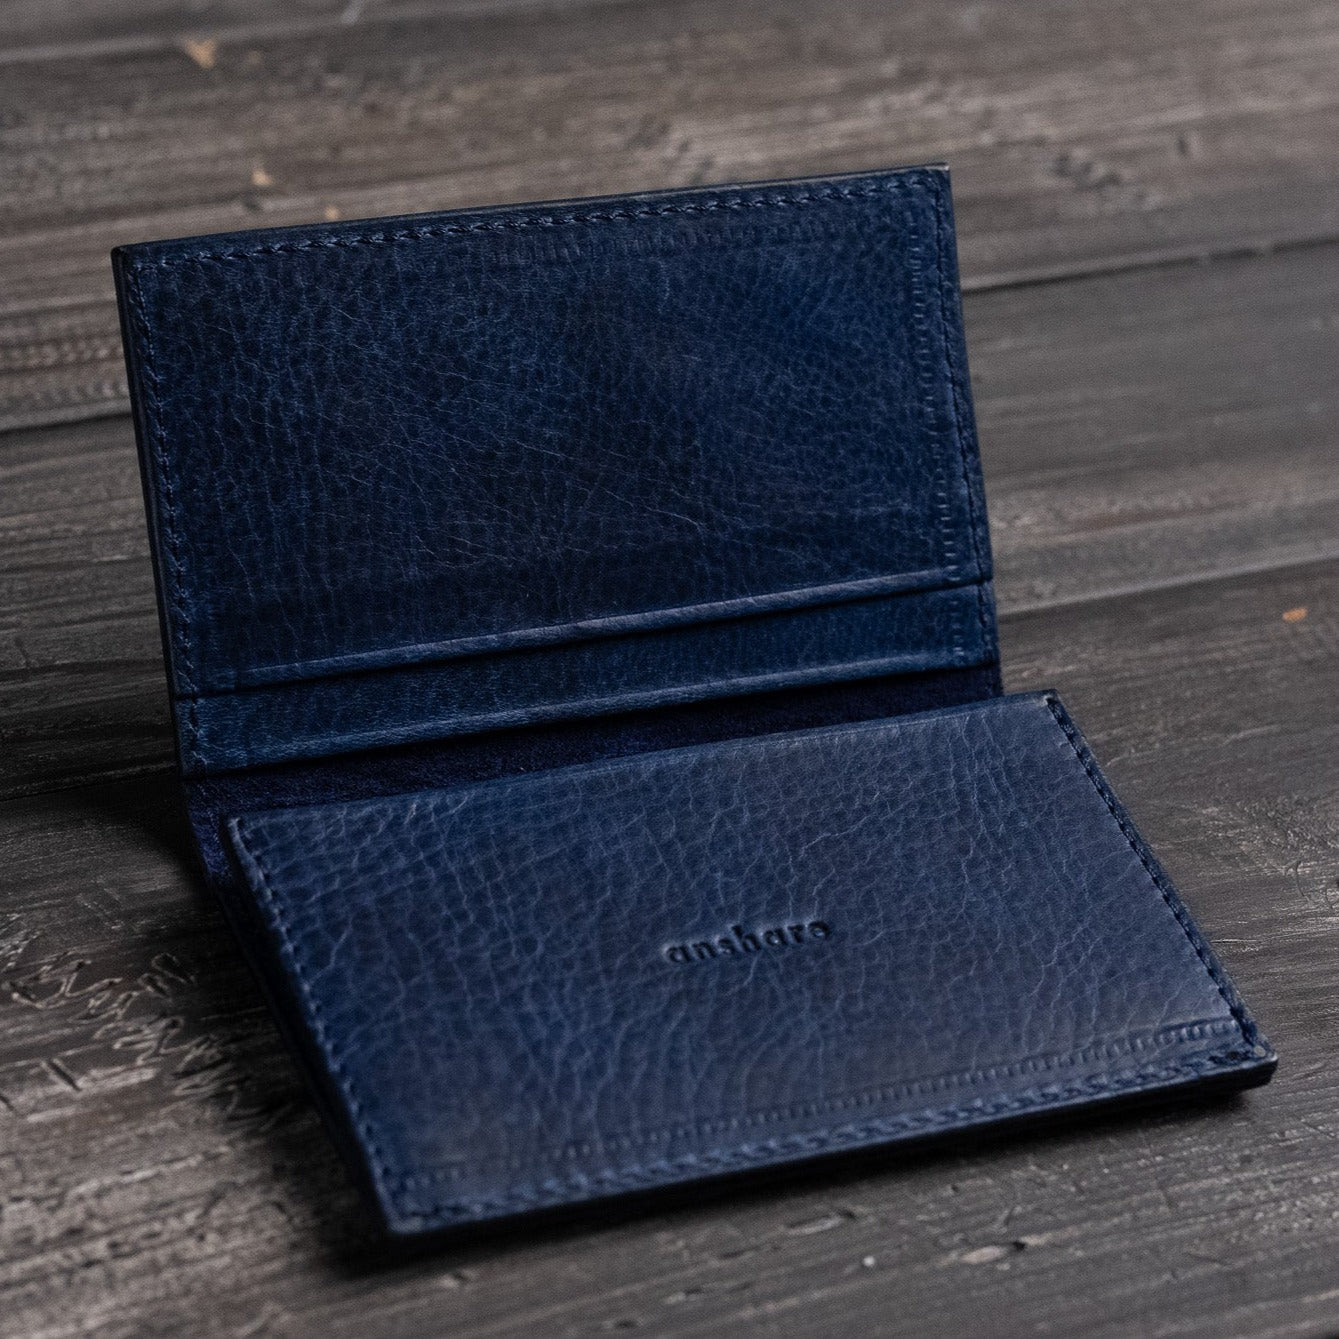 Business card holder with core